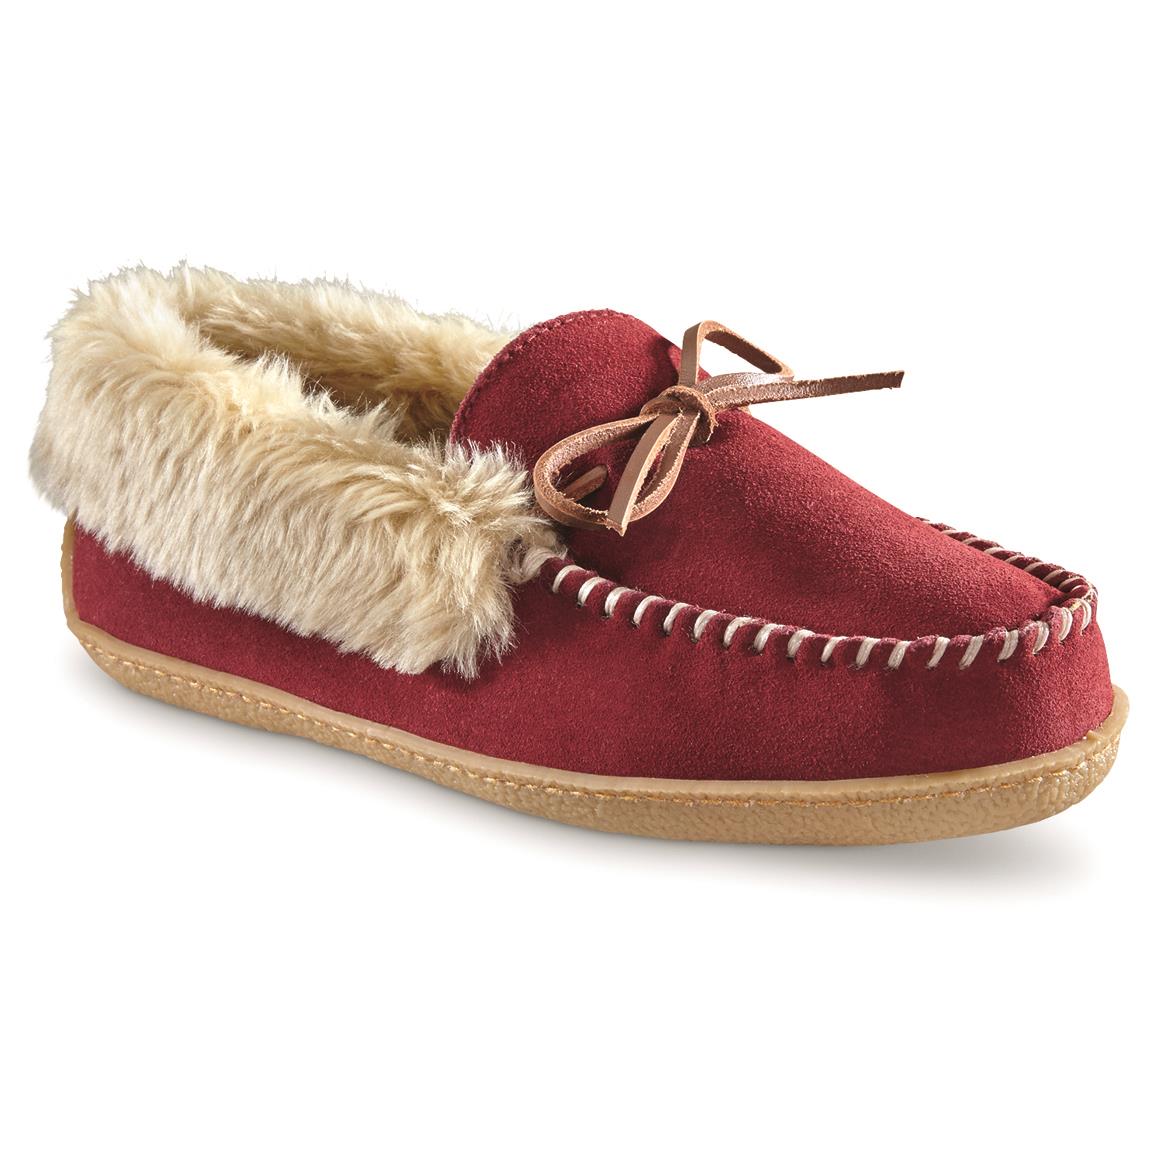 burgundy moccasin slippers